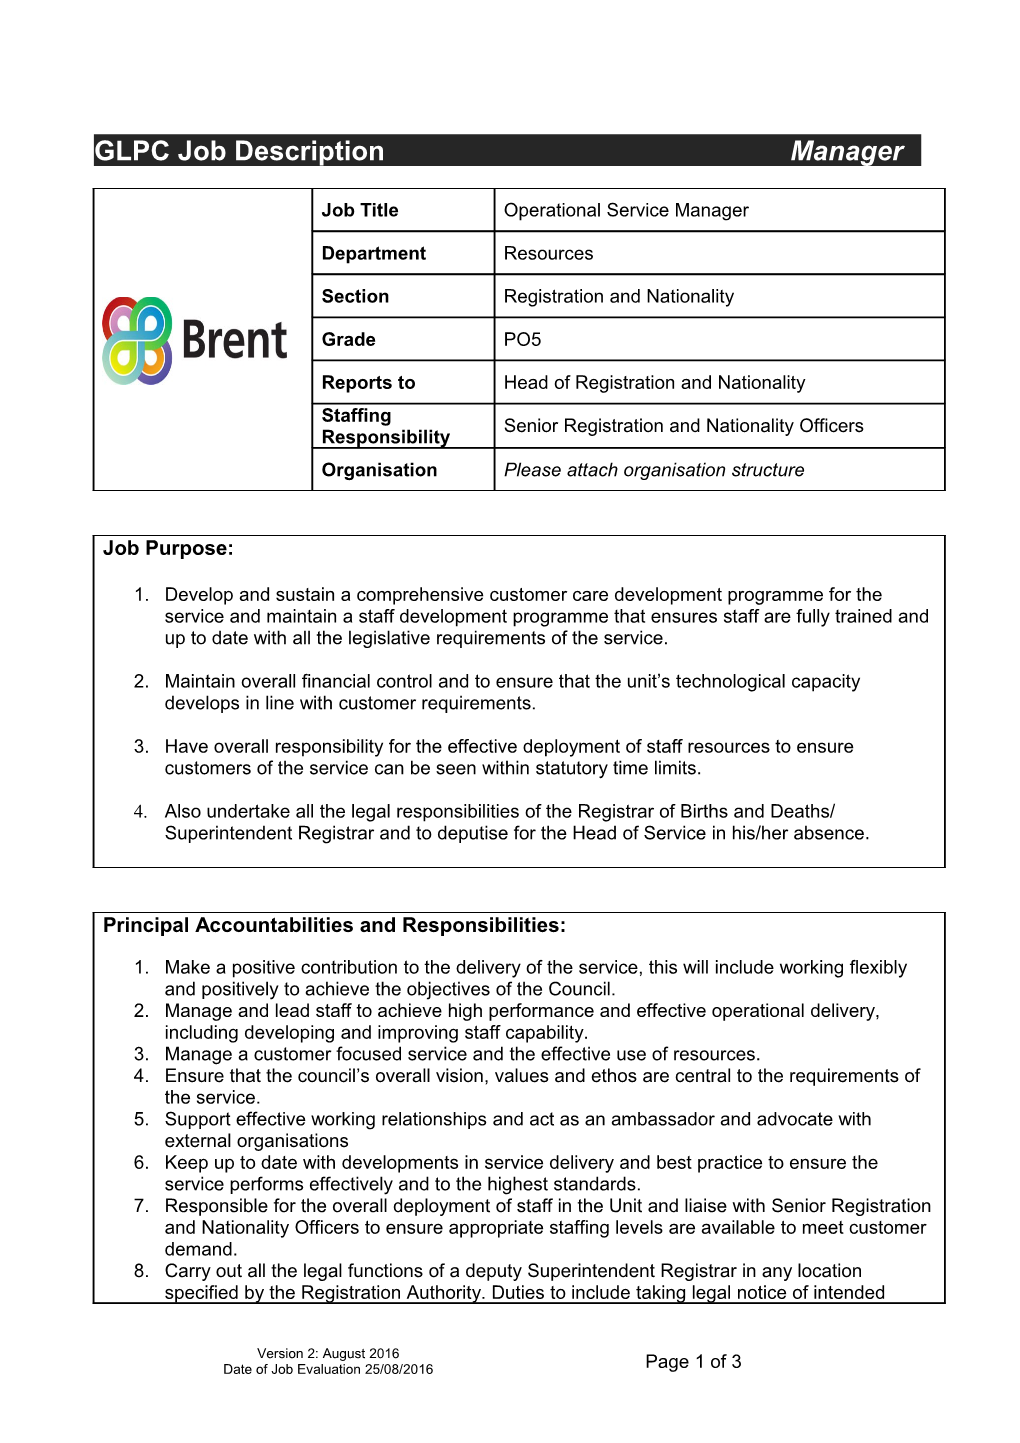 Application for Job Evaluation s8